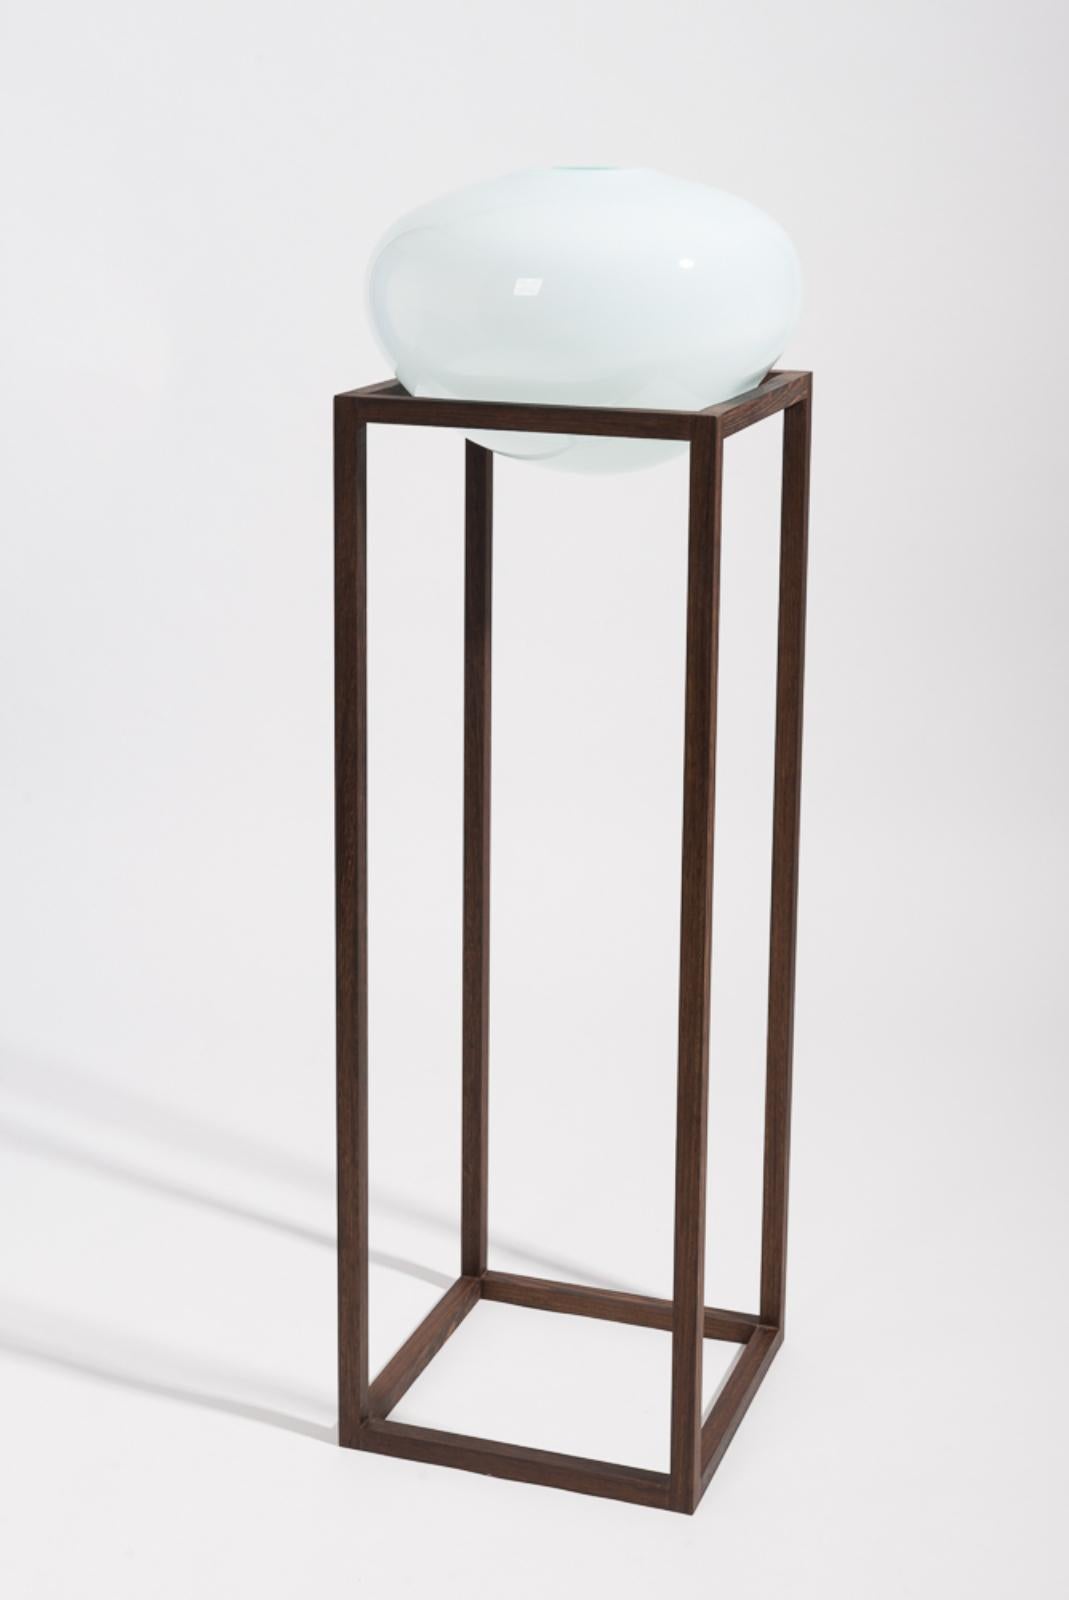 Set of 4 high round square green vase by Studio Thier & van Daalen
Dimensions: W 36 x D 36 x H 120 cm
Materials: Wood, Glass

When blowing soap bubbles in the air Iris & Ruben had the dream to capture these temporary beauties in a tendril frame.